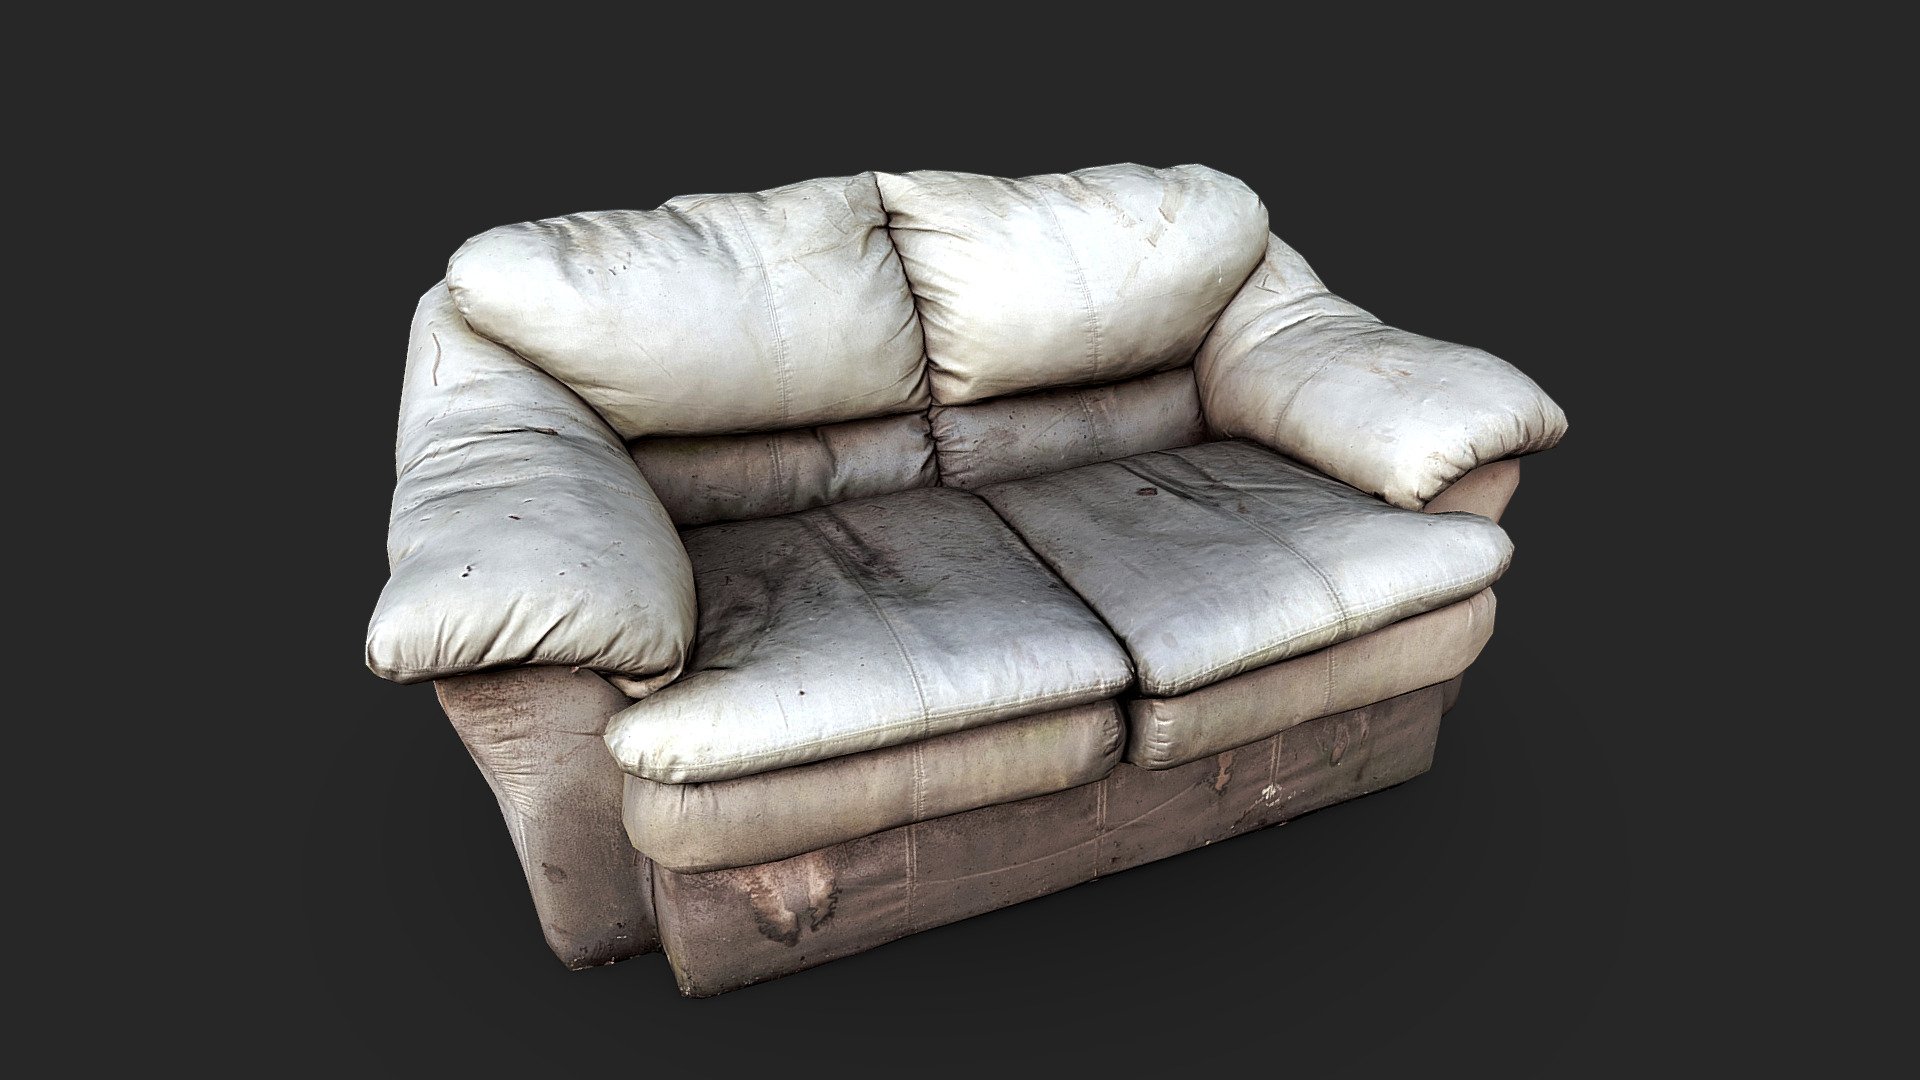 Remake of &ldquo;Old Couch - Photogrammetry Scan